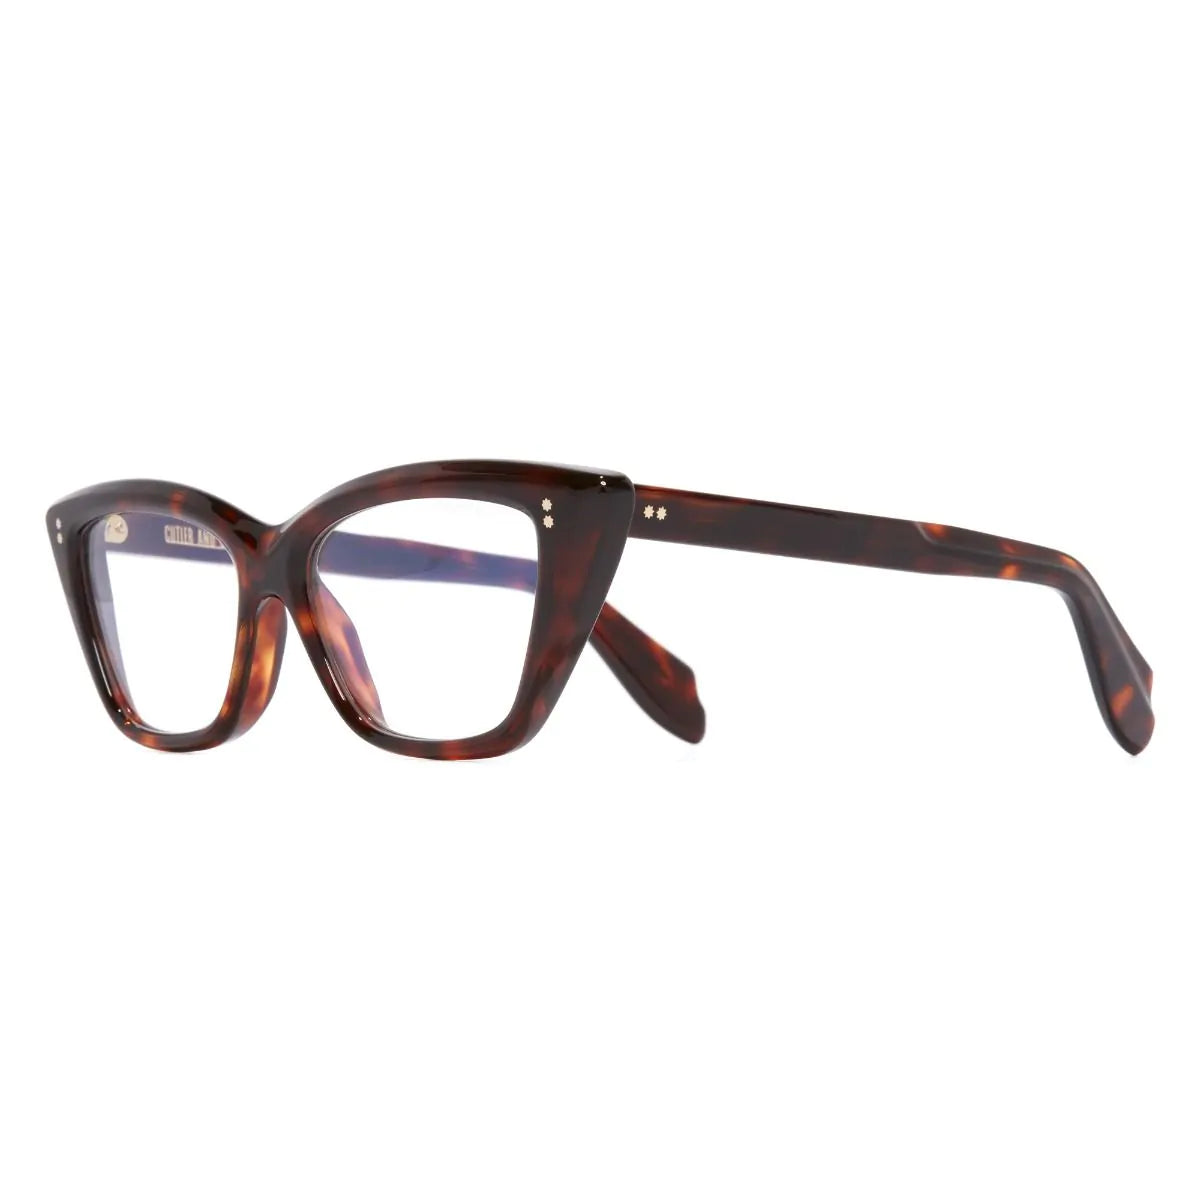 9241 Cat Eye Optical Glasses - Dark Turtle by Cutler and Gross